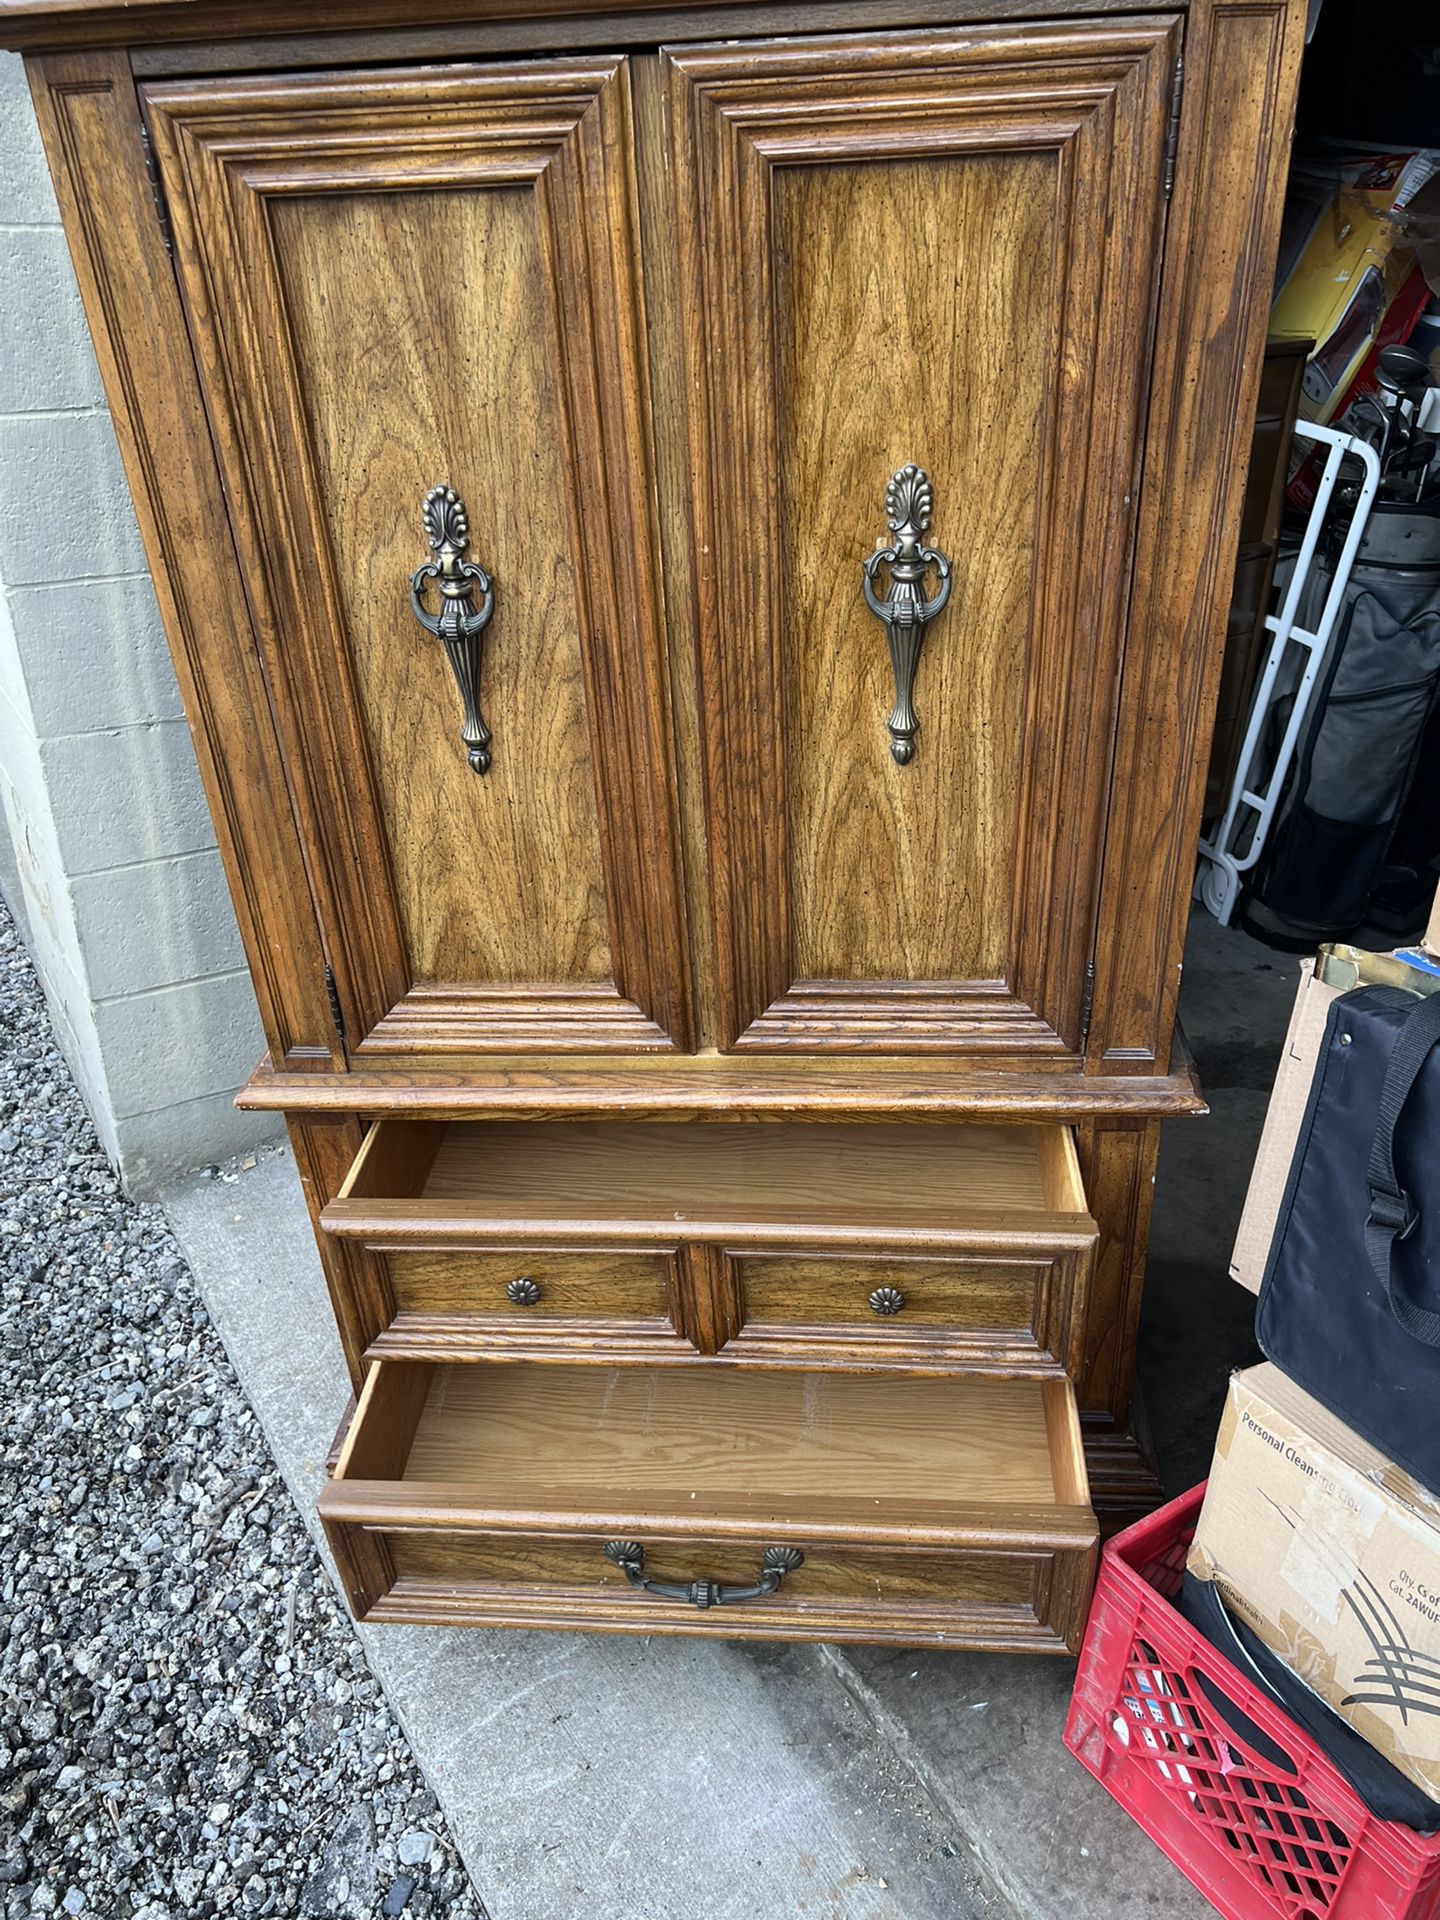 Wooden Armoire, and Matching Nightstand.  Armoire  38”wide  20”deep  60”tall  Nightstand  26”wide  16”deep  24 3/4” tall  